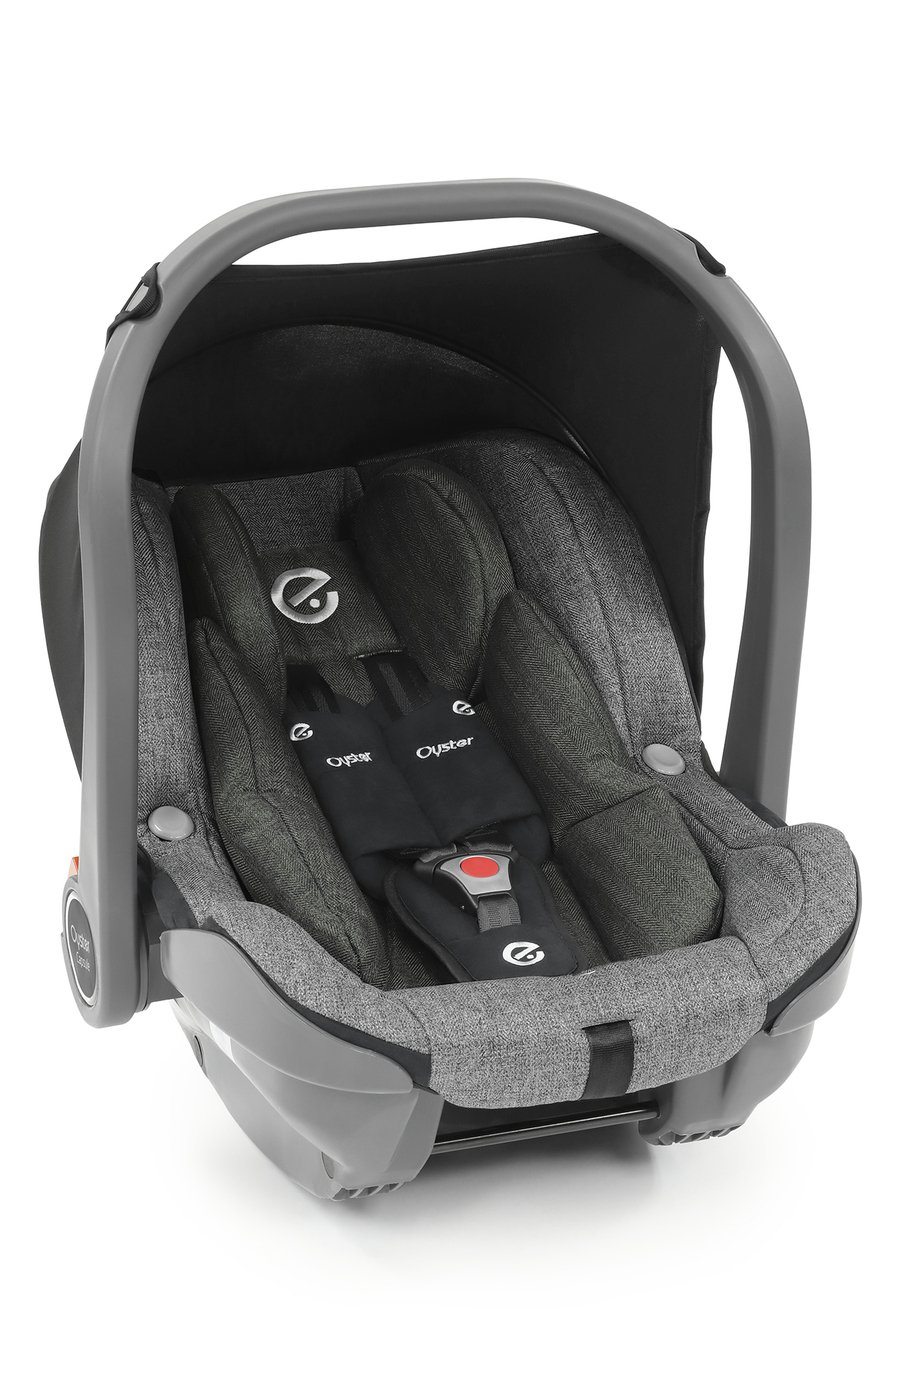 Oyster Capsule Group 0+ Car Seat Review